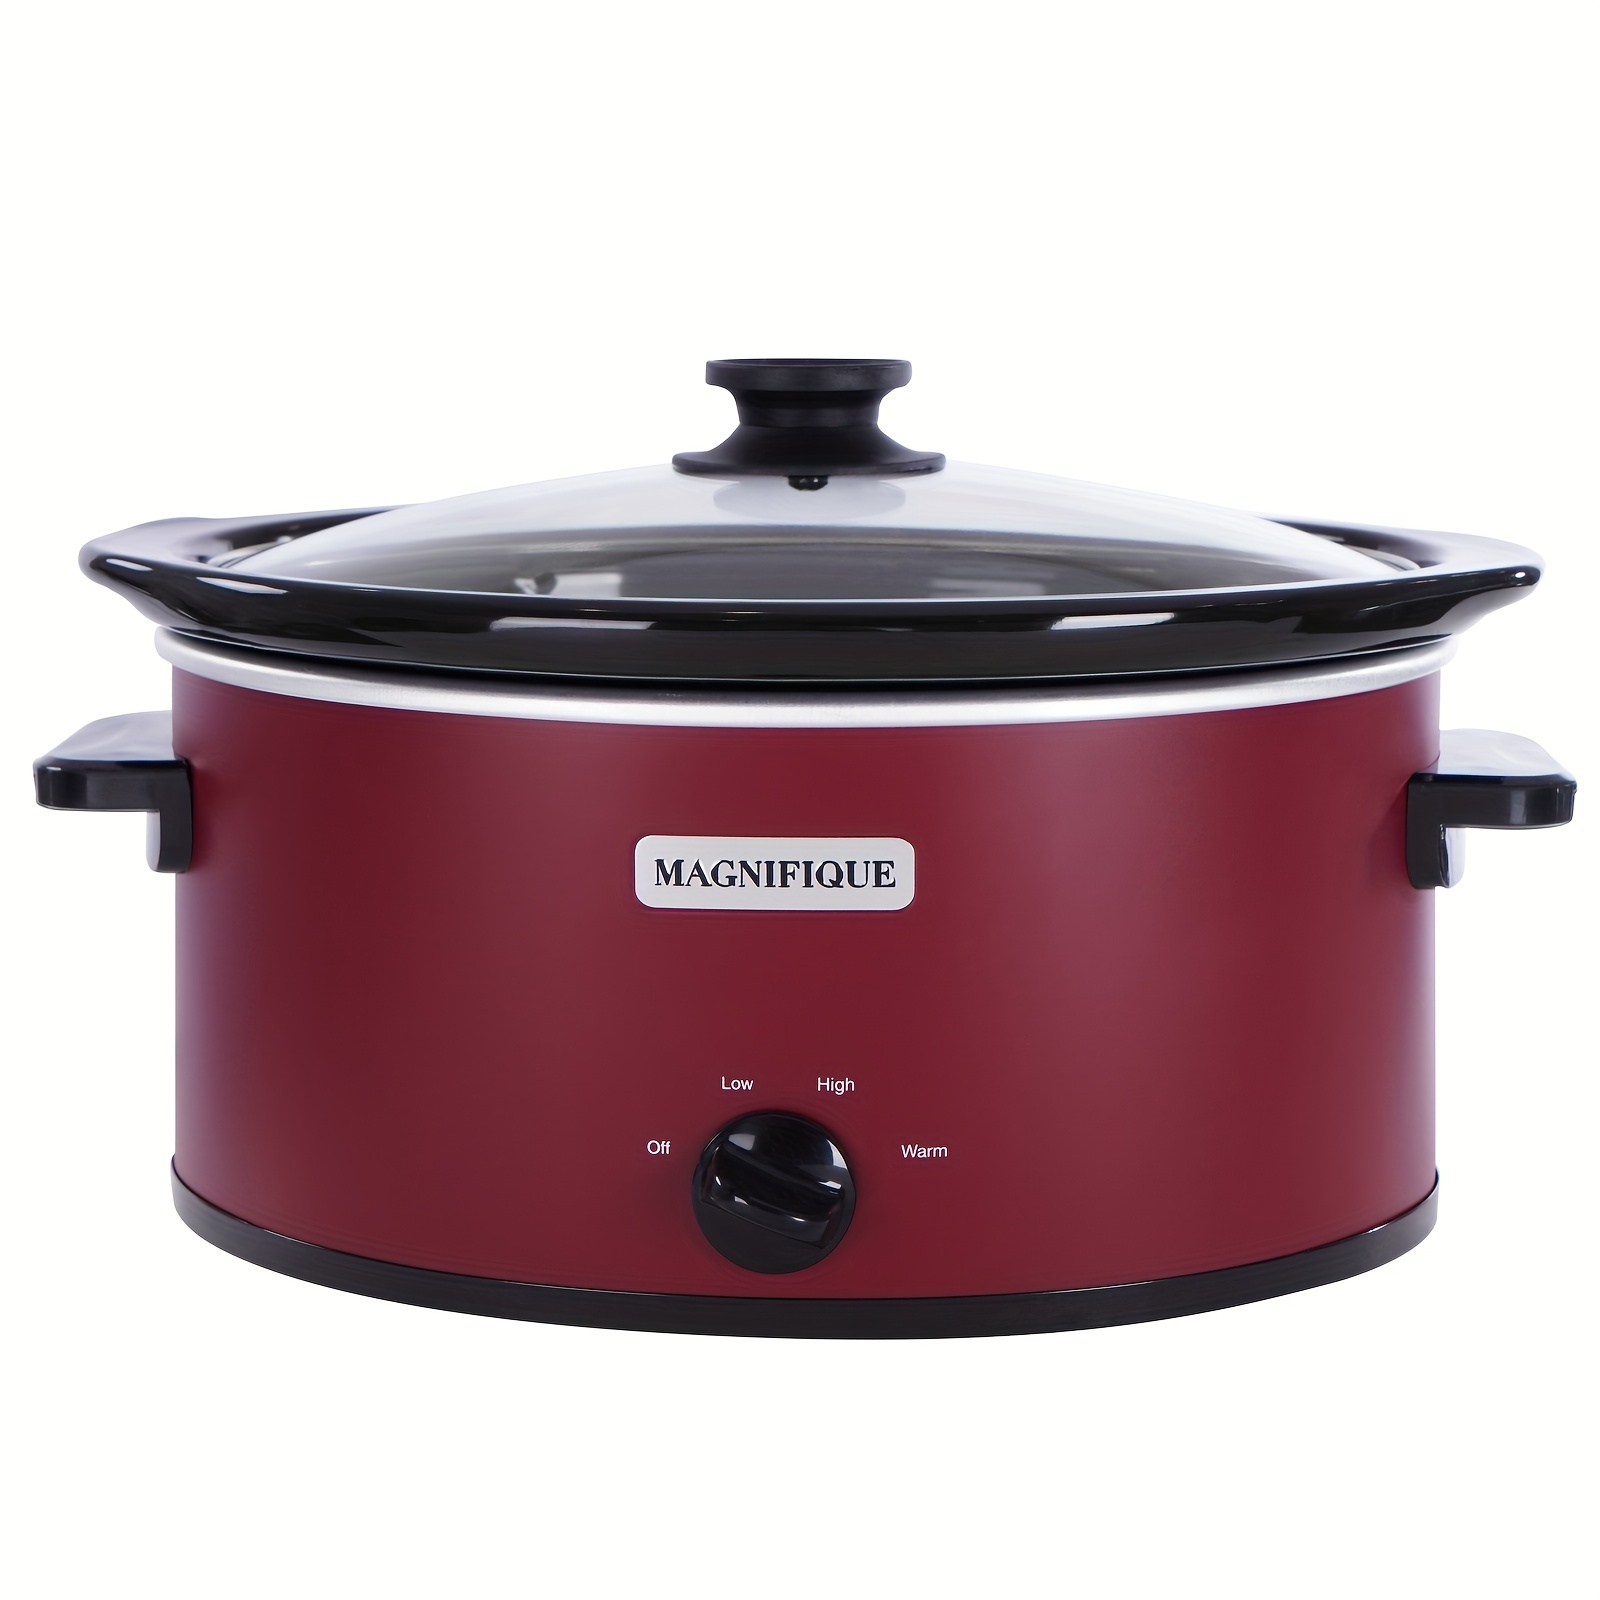 

1pc, Magnifique 6 Quart Slow Cooker, Oval Manual Pot, Food Warmer With 3 Cooking Settings, Red Stainless Steel, Kitchen Supplies